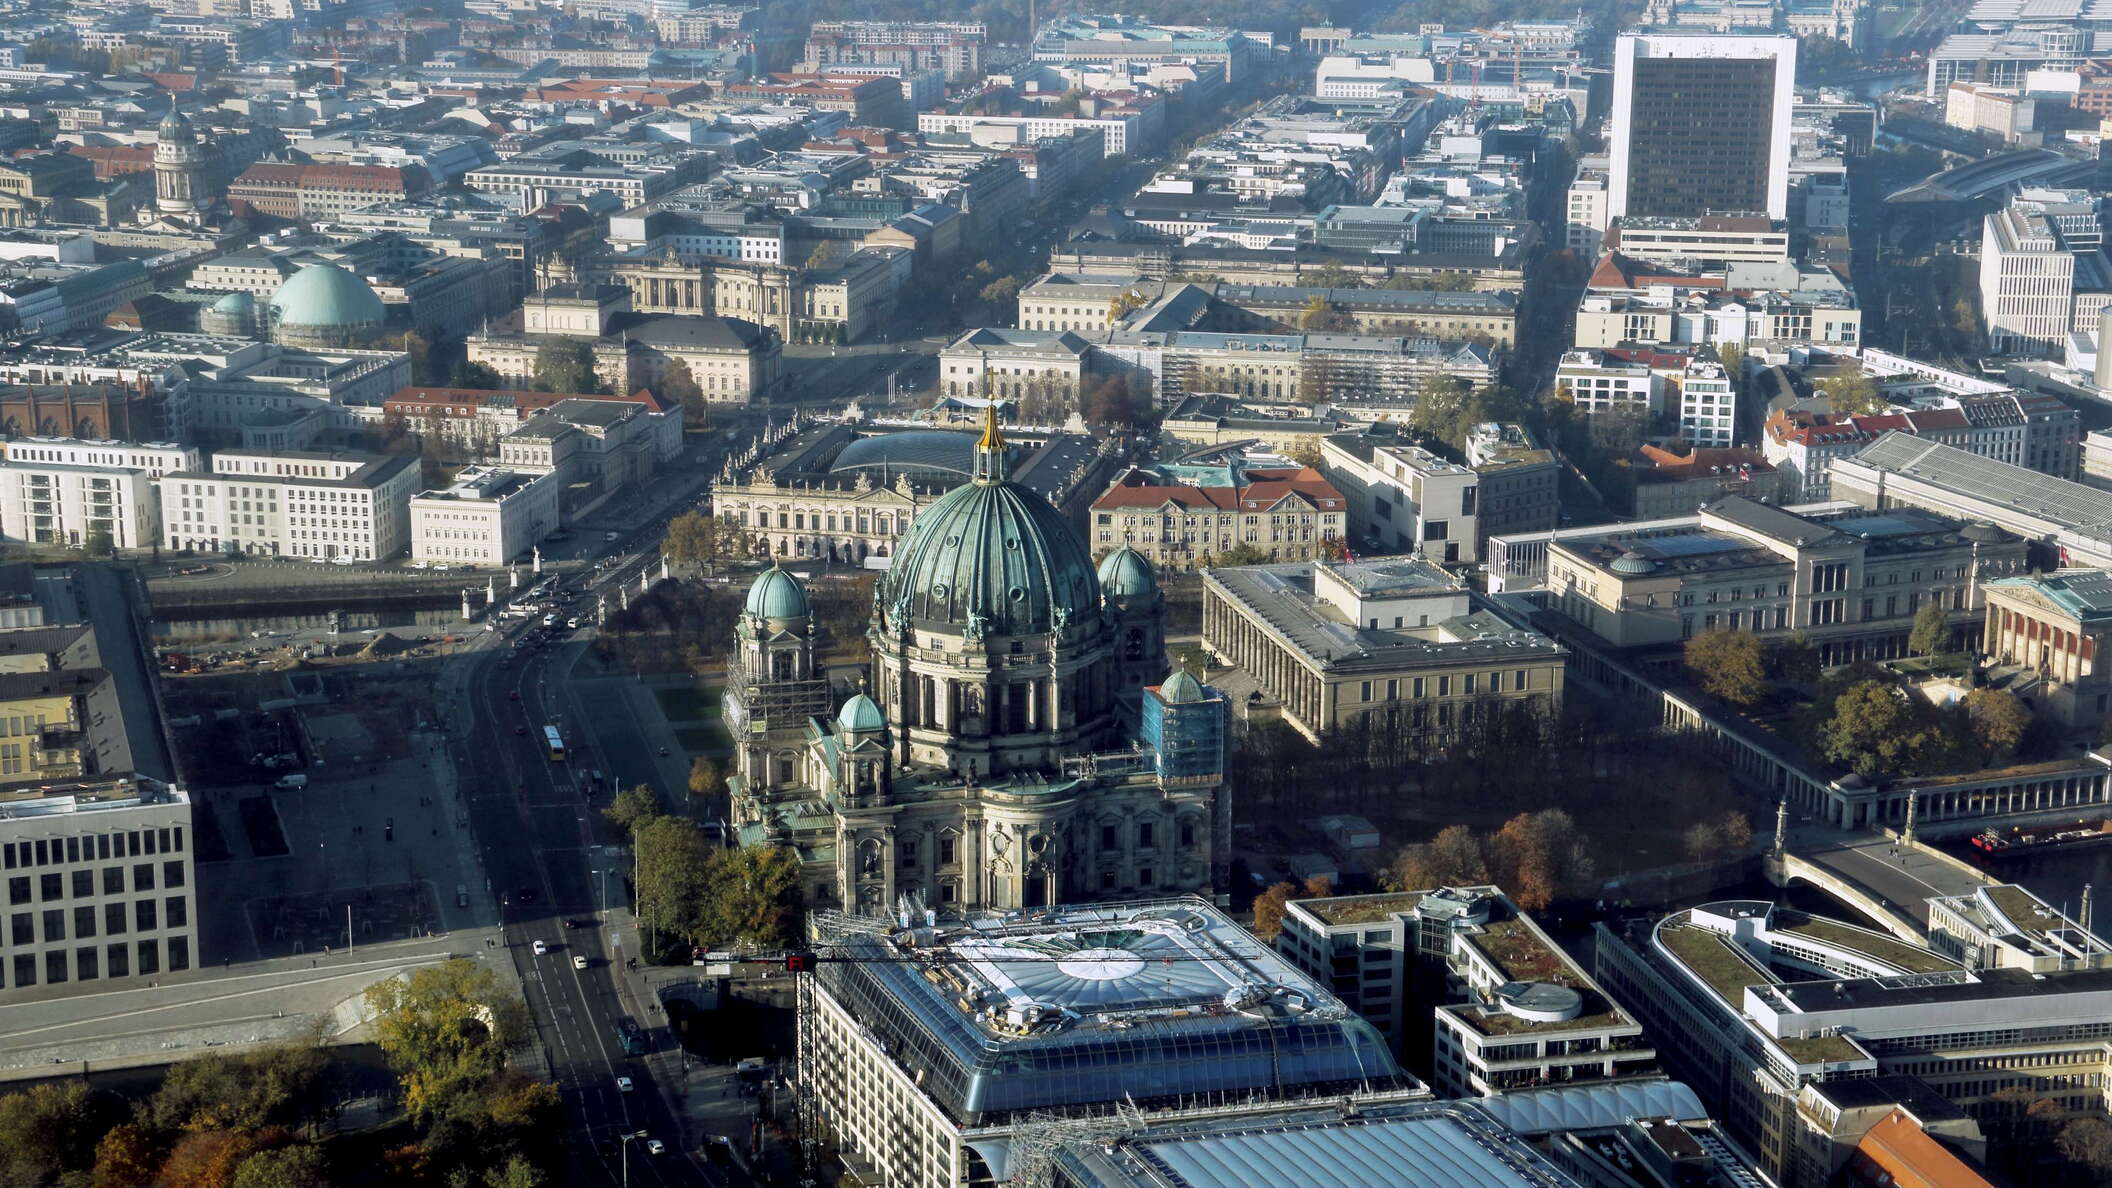 Berlin Mitte with Cathedral and Unter den Linden